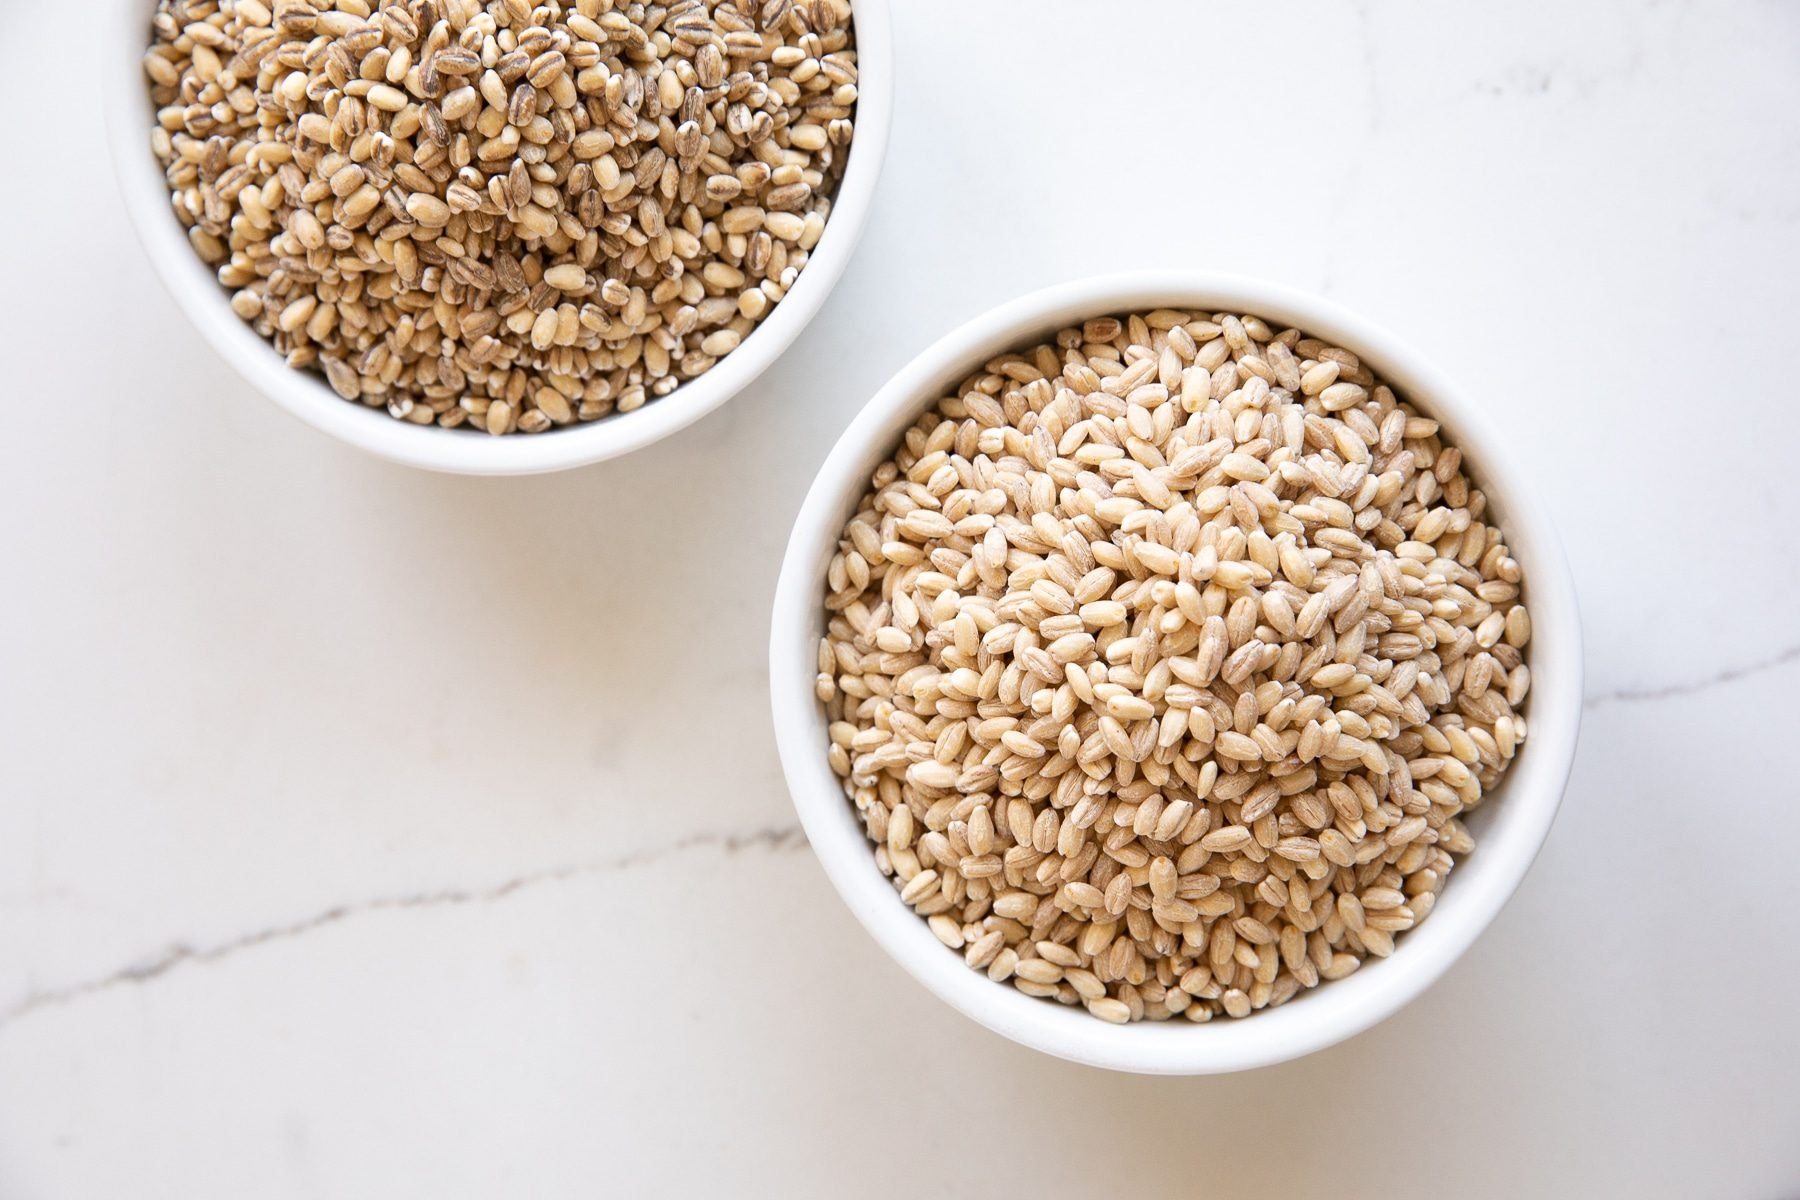 Image of two white ramekins one filled with pearled barley and one with hulled barley.